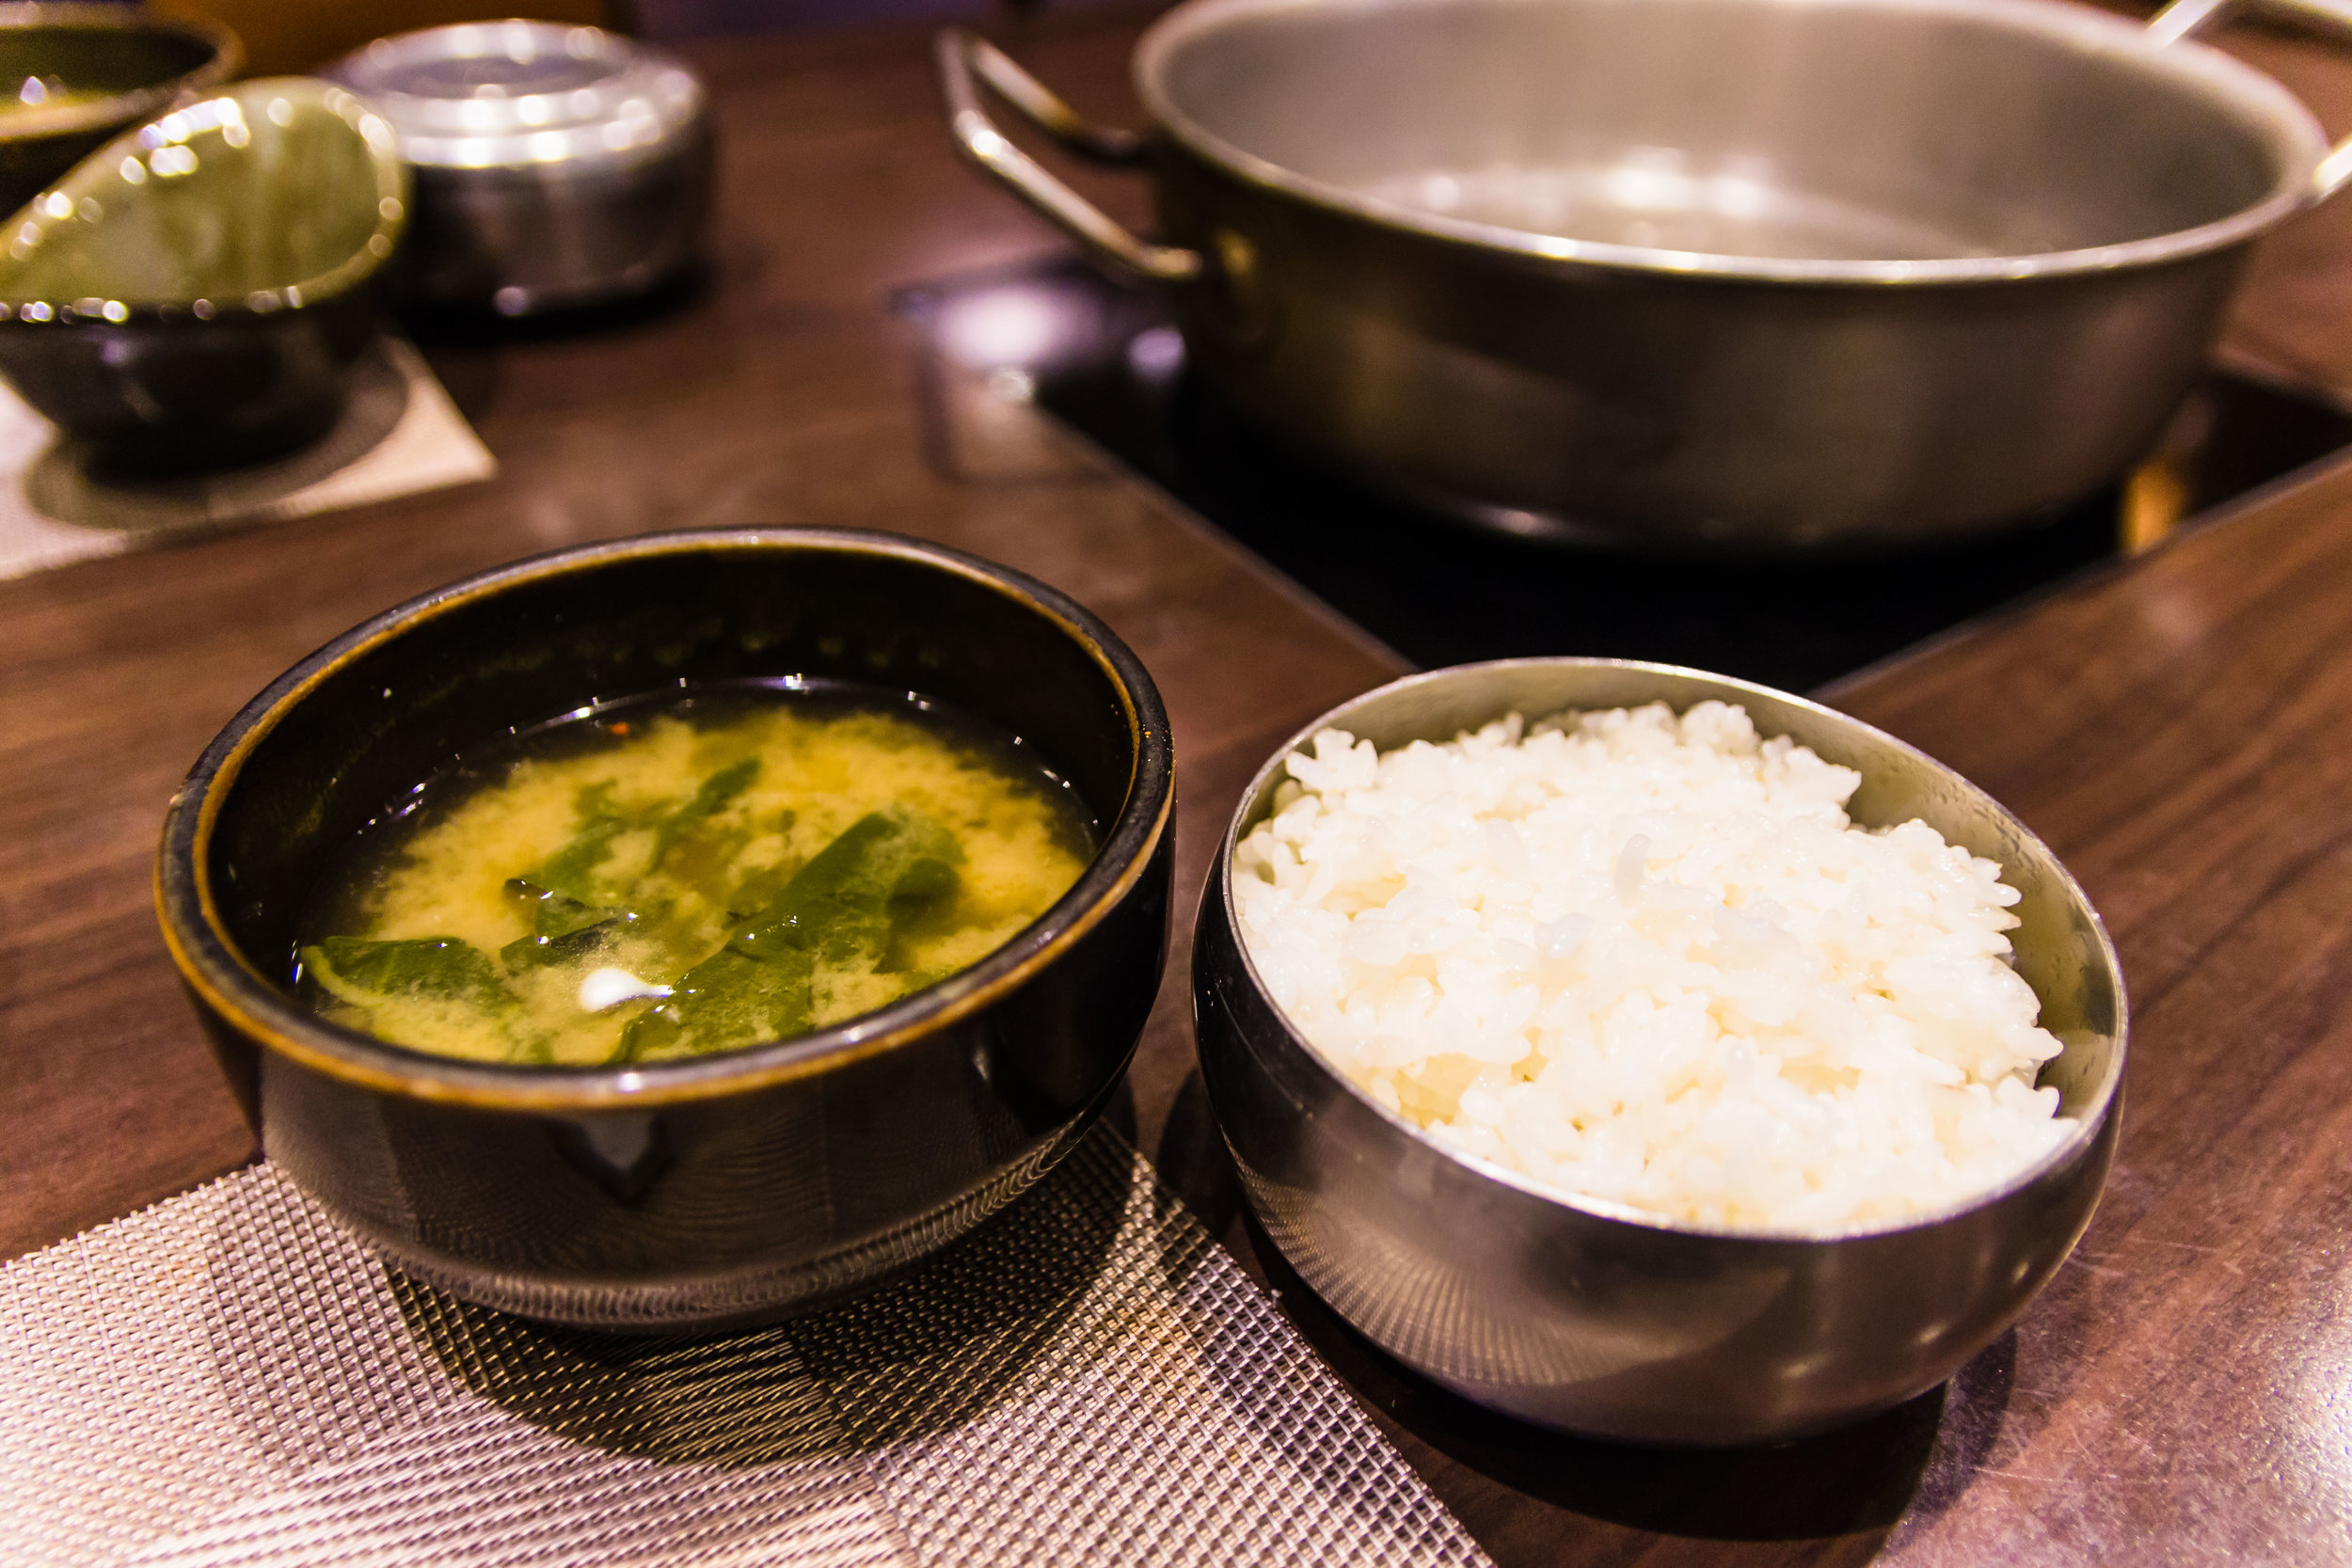 Rice and seaweed soup